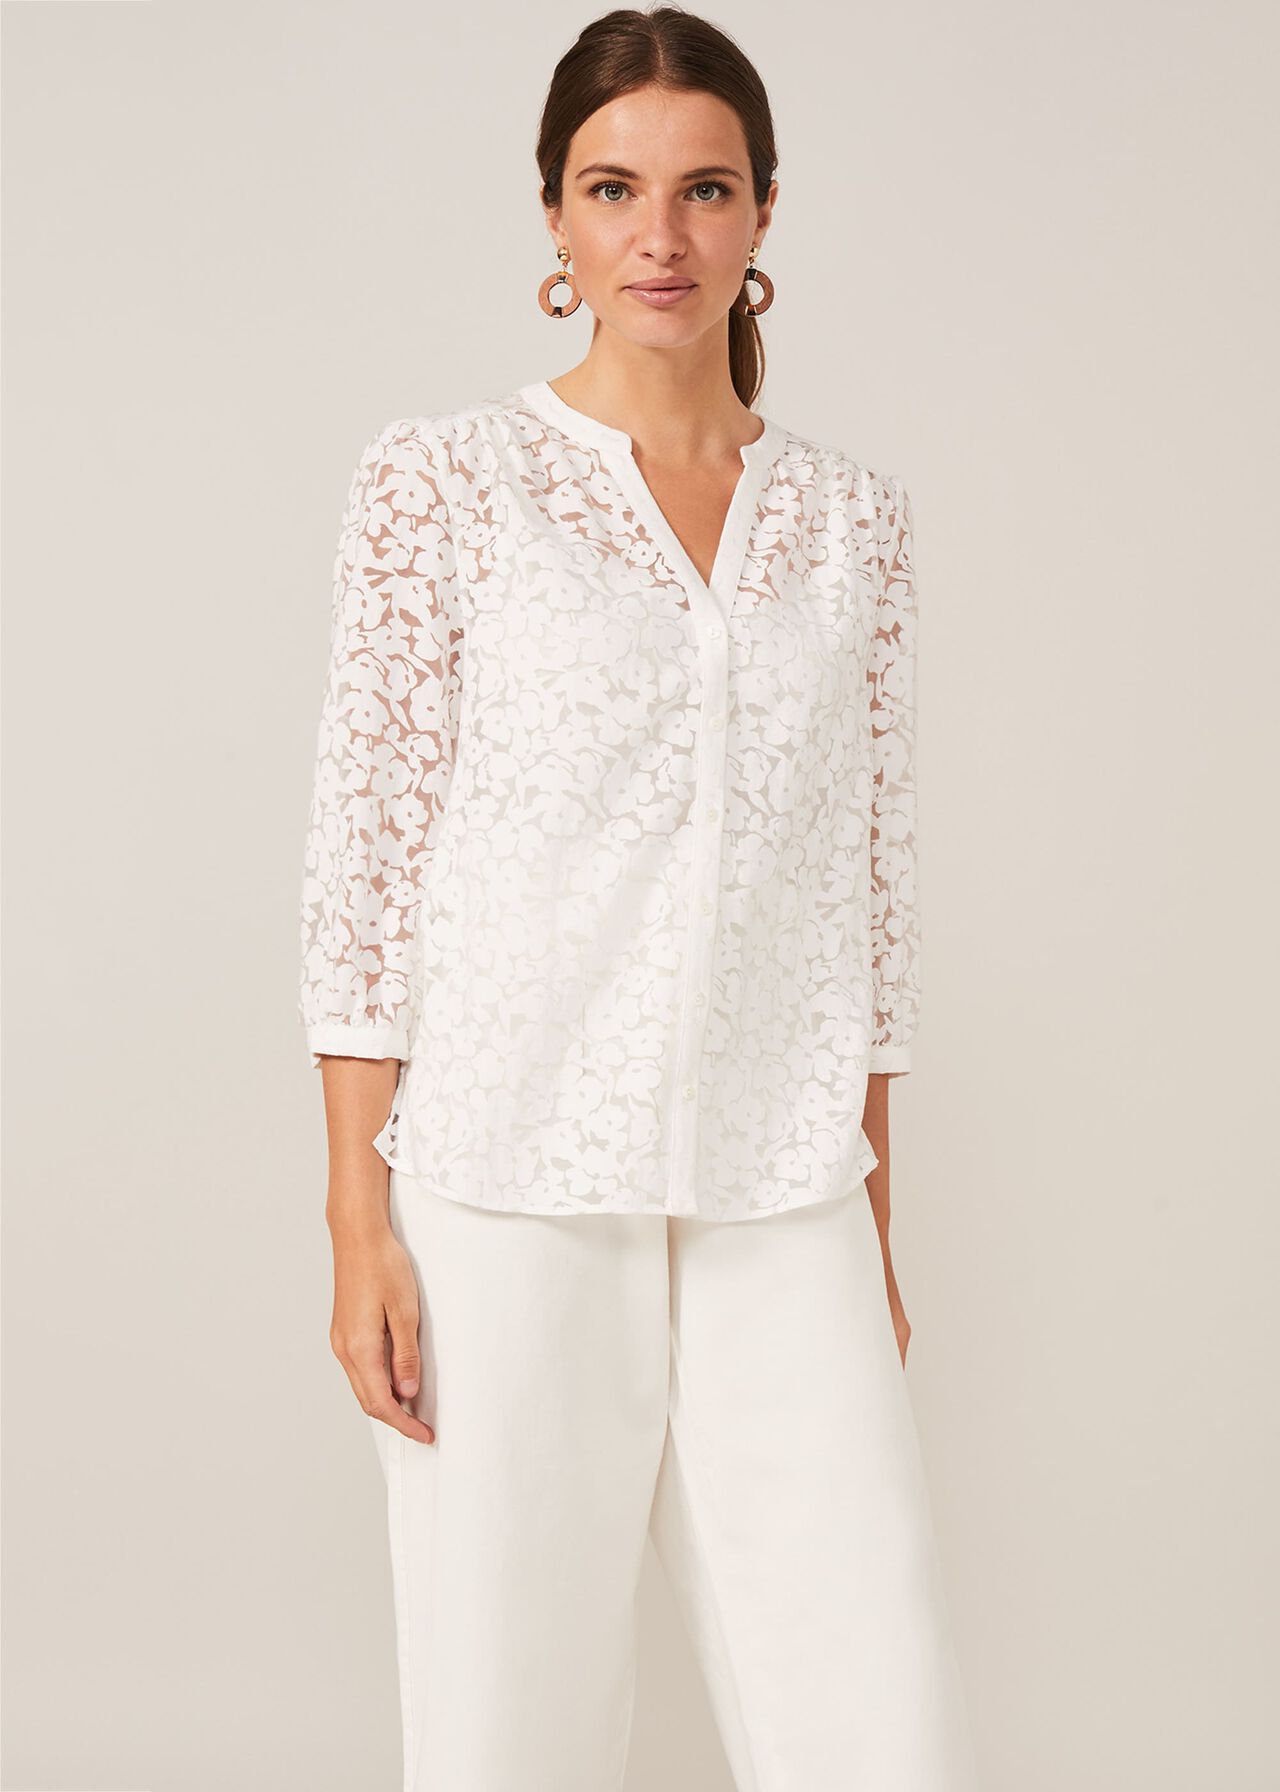 Burnout Floral Blouse Phase Eight